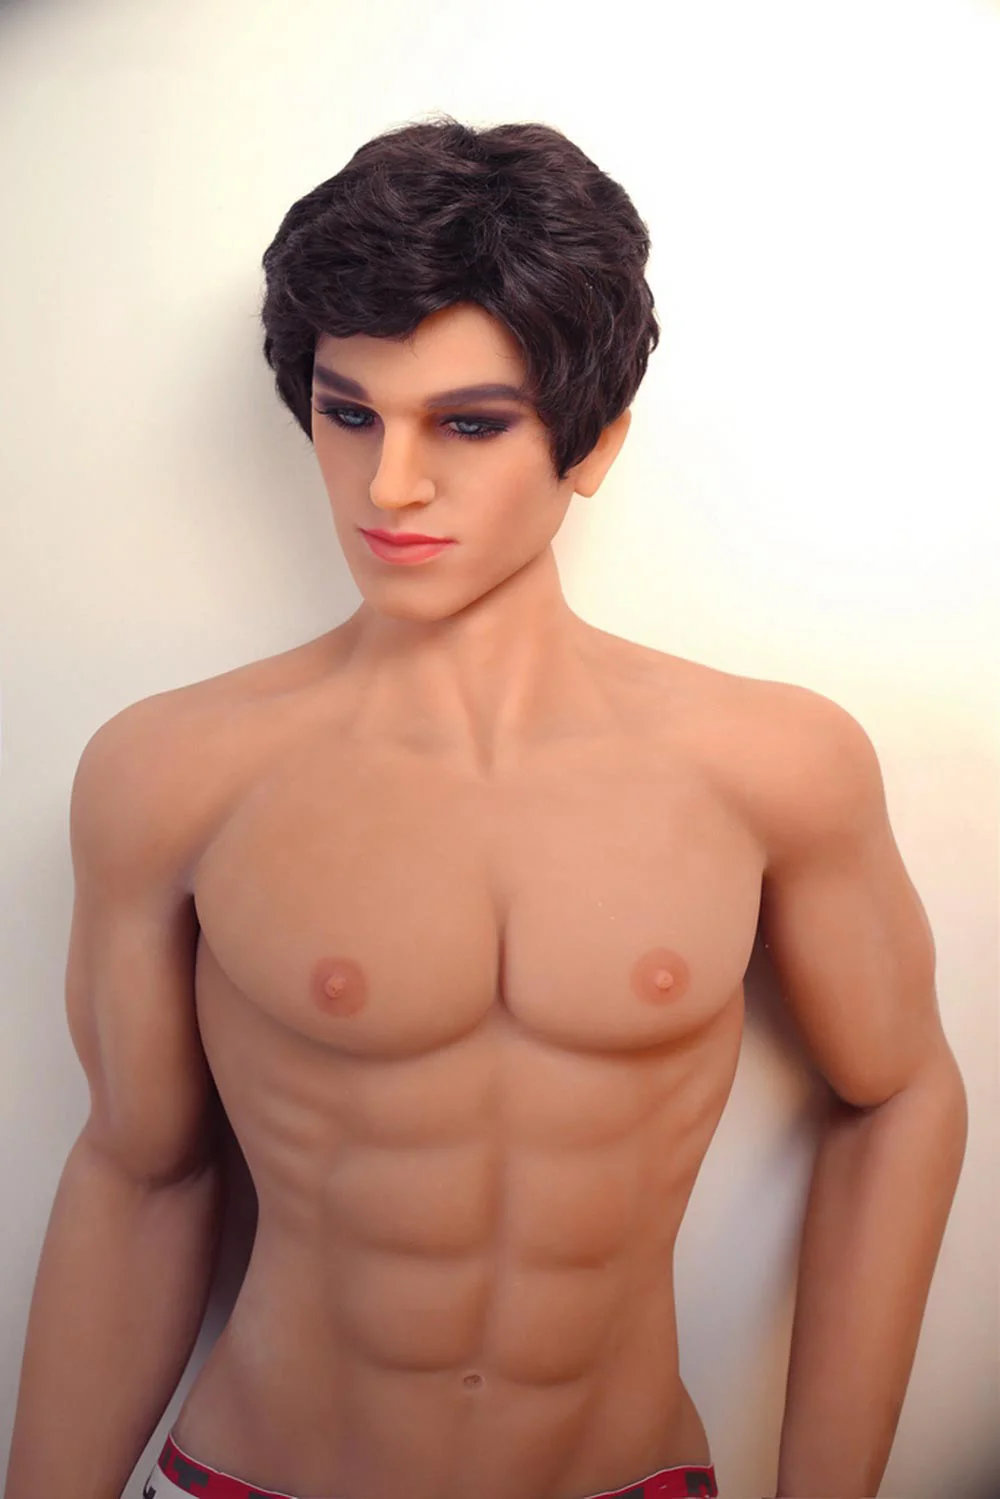 Male-sex-doll-with-short-black-hair